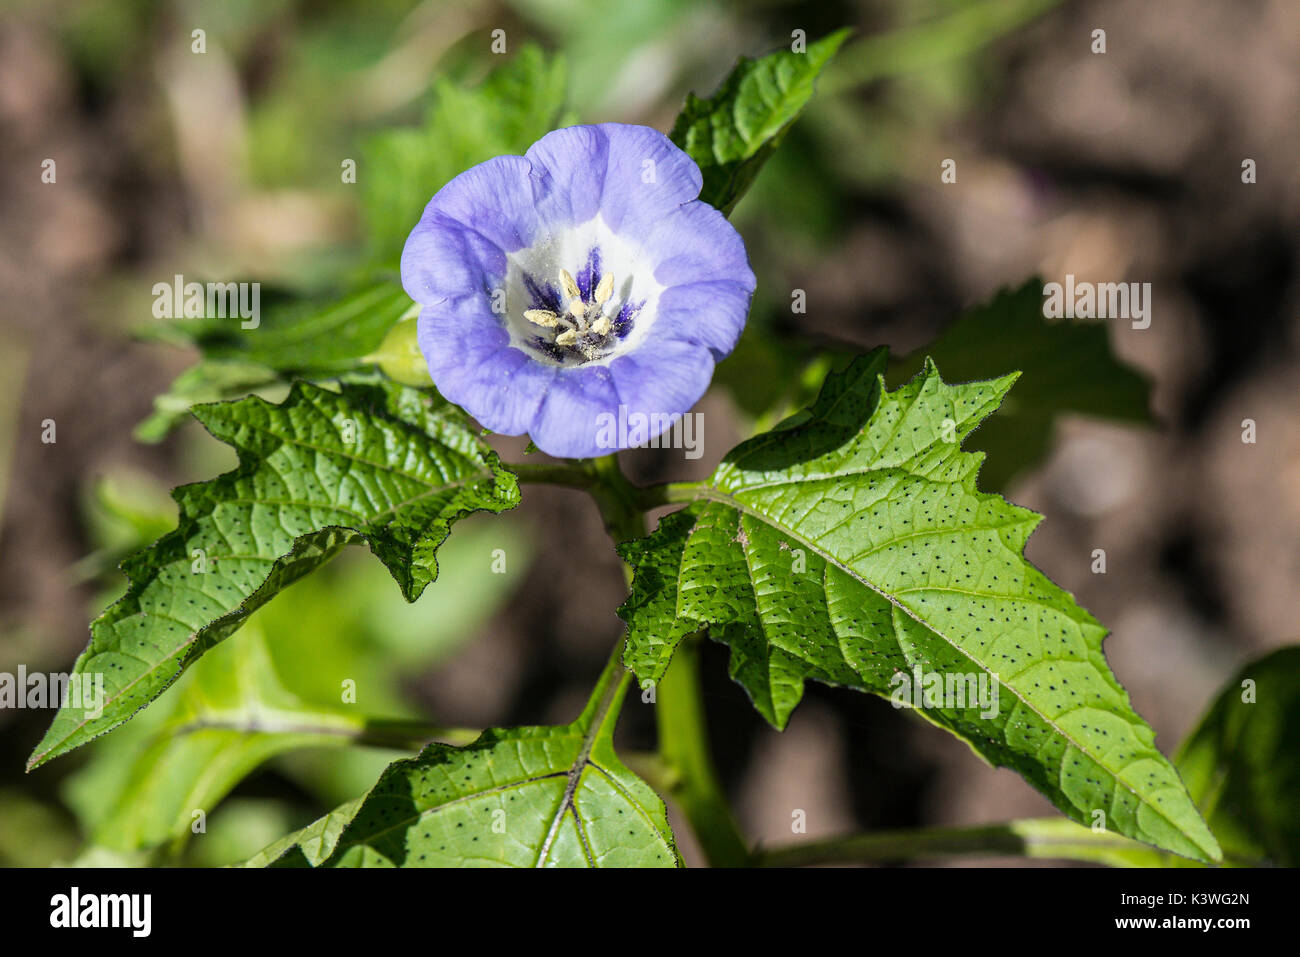 A flower on a shoo-fly plant (Nicandra physalodes) Stock Photo